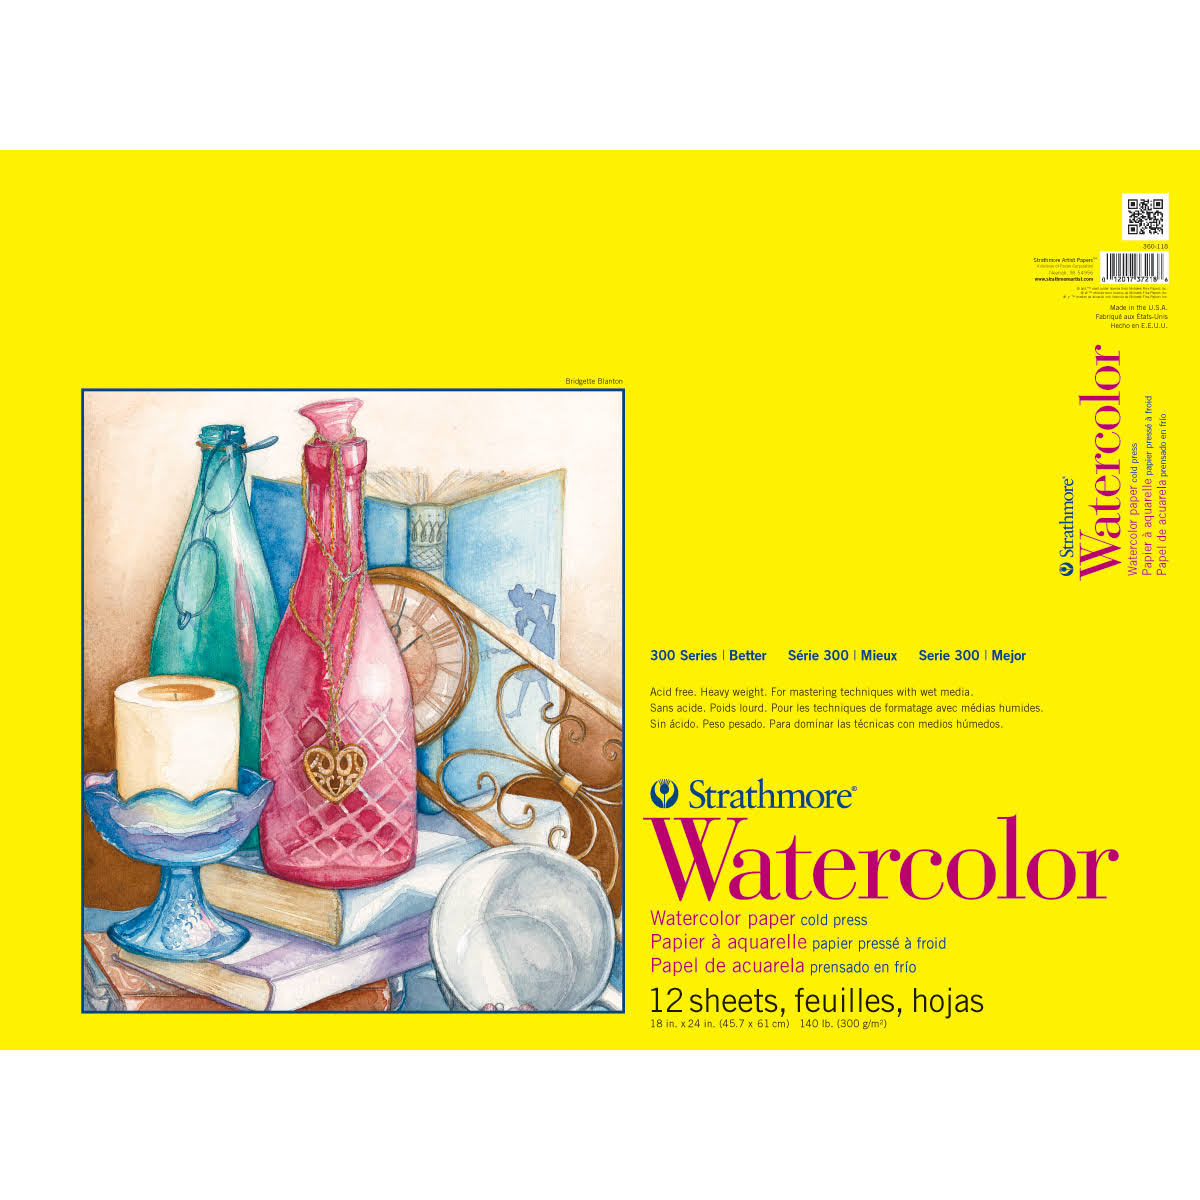 Strathmore Watercolor Paper Taped Pad - 12 Sheets, 18" x 24"